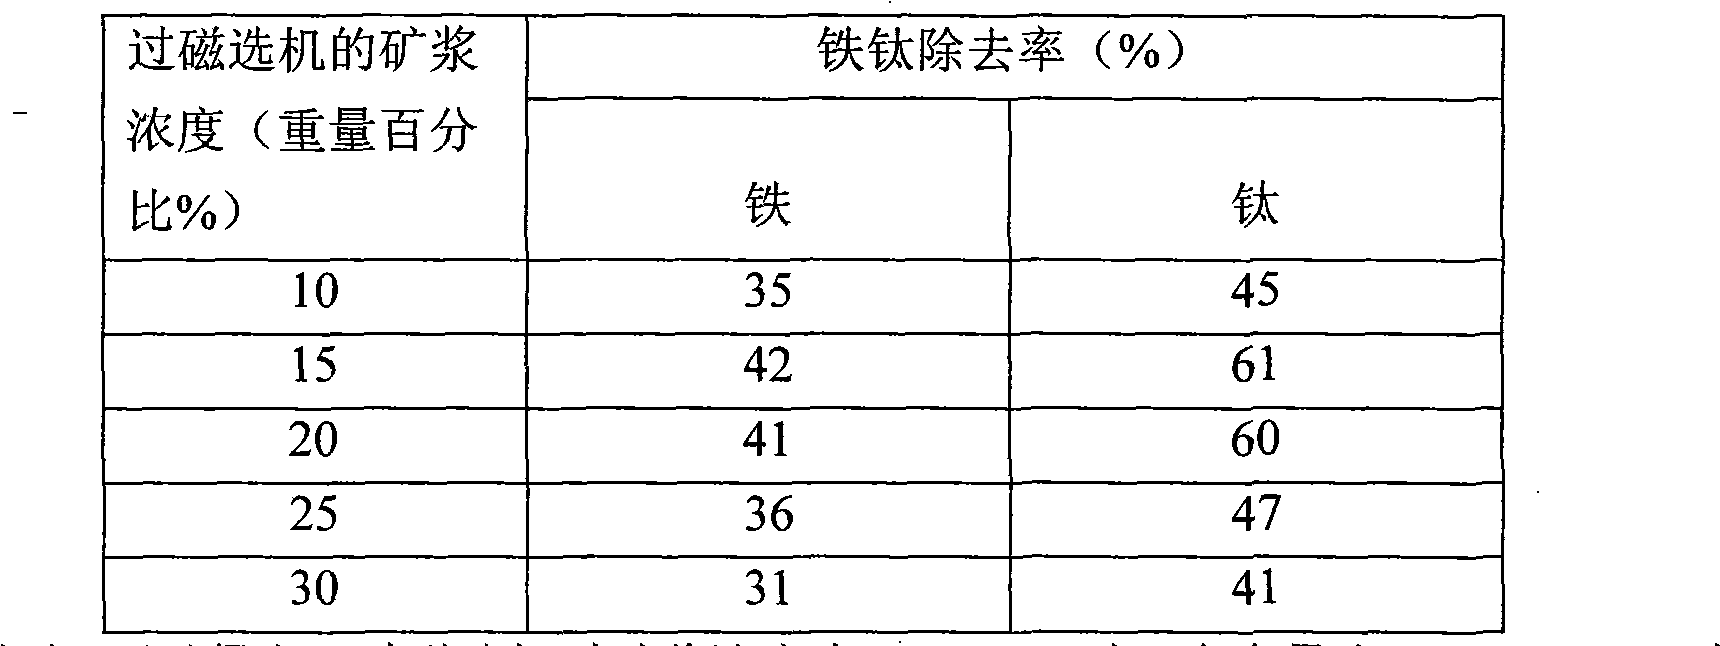 Method for removing iron titanium from non-metallic mineral raw materials